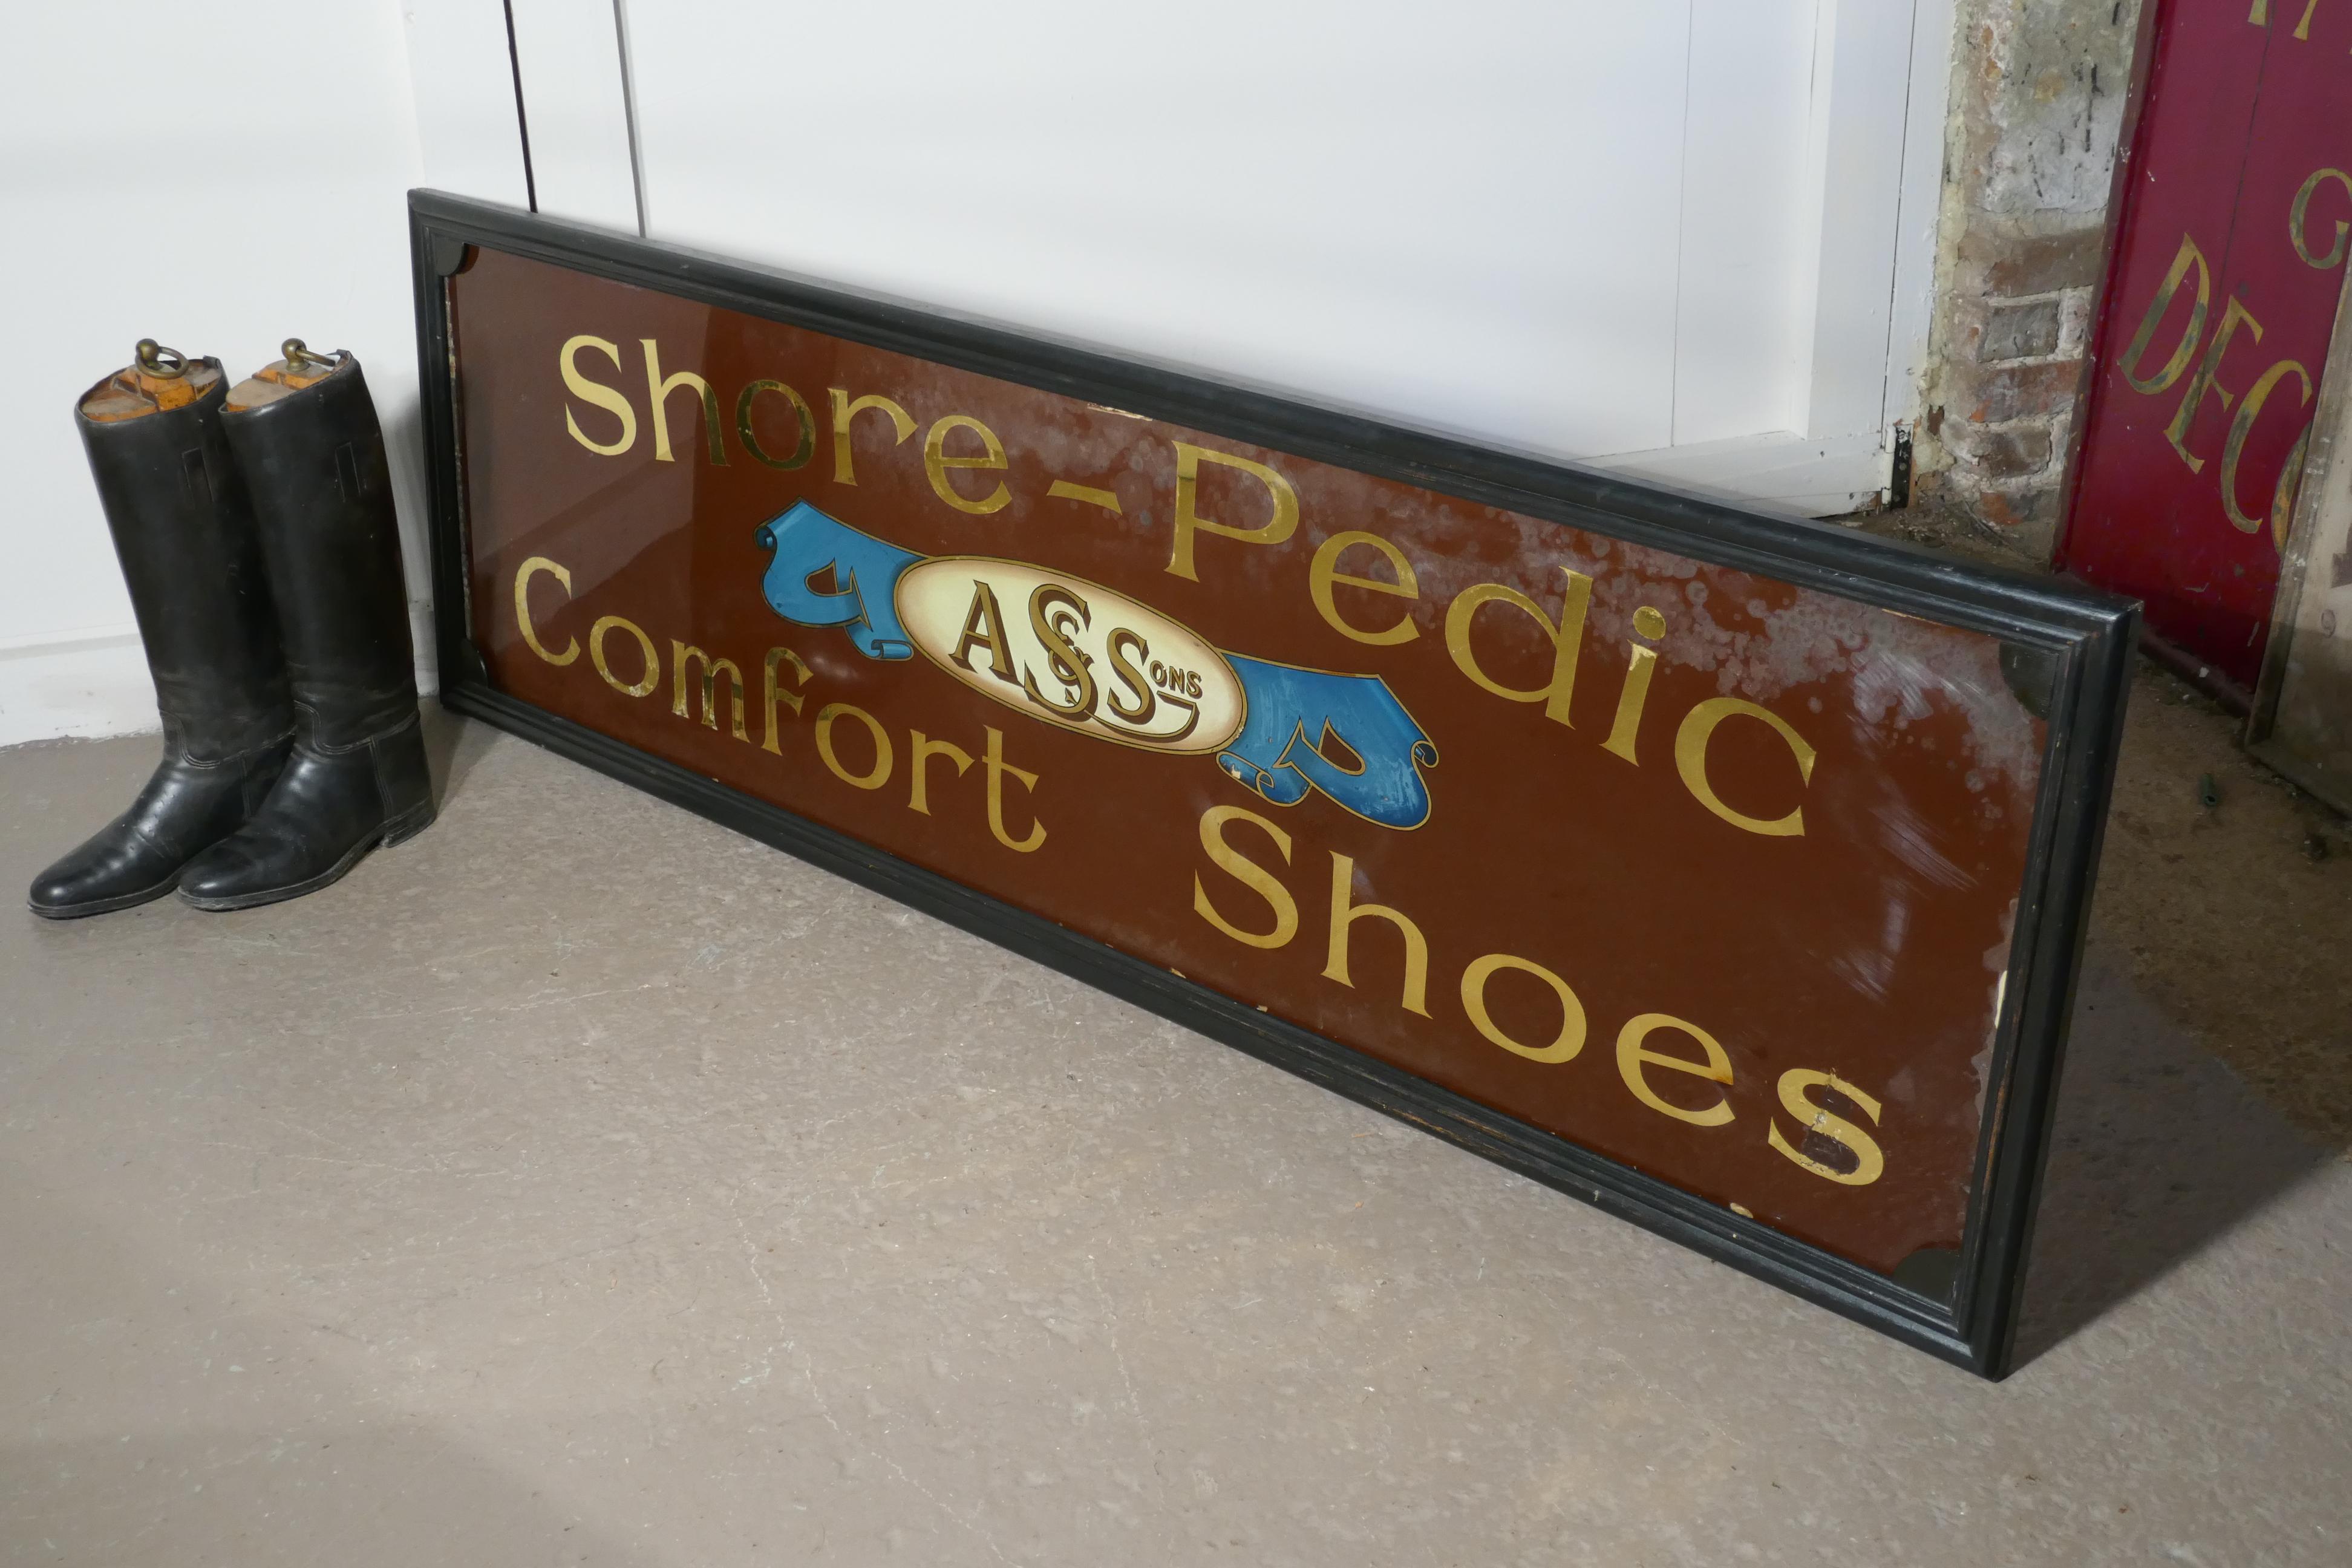 Shoe shop mirror advertising sign, A S & Sons Shore Pedic Shoes.

This is a great and authentic piece, the sign has gold mirrored lettering on brown glass, the glass is set in a black frame and is advertising, Shore Pedic Comfort Shoes
The sign